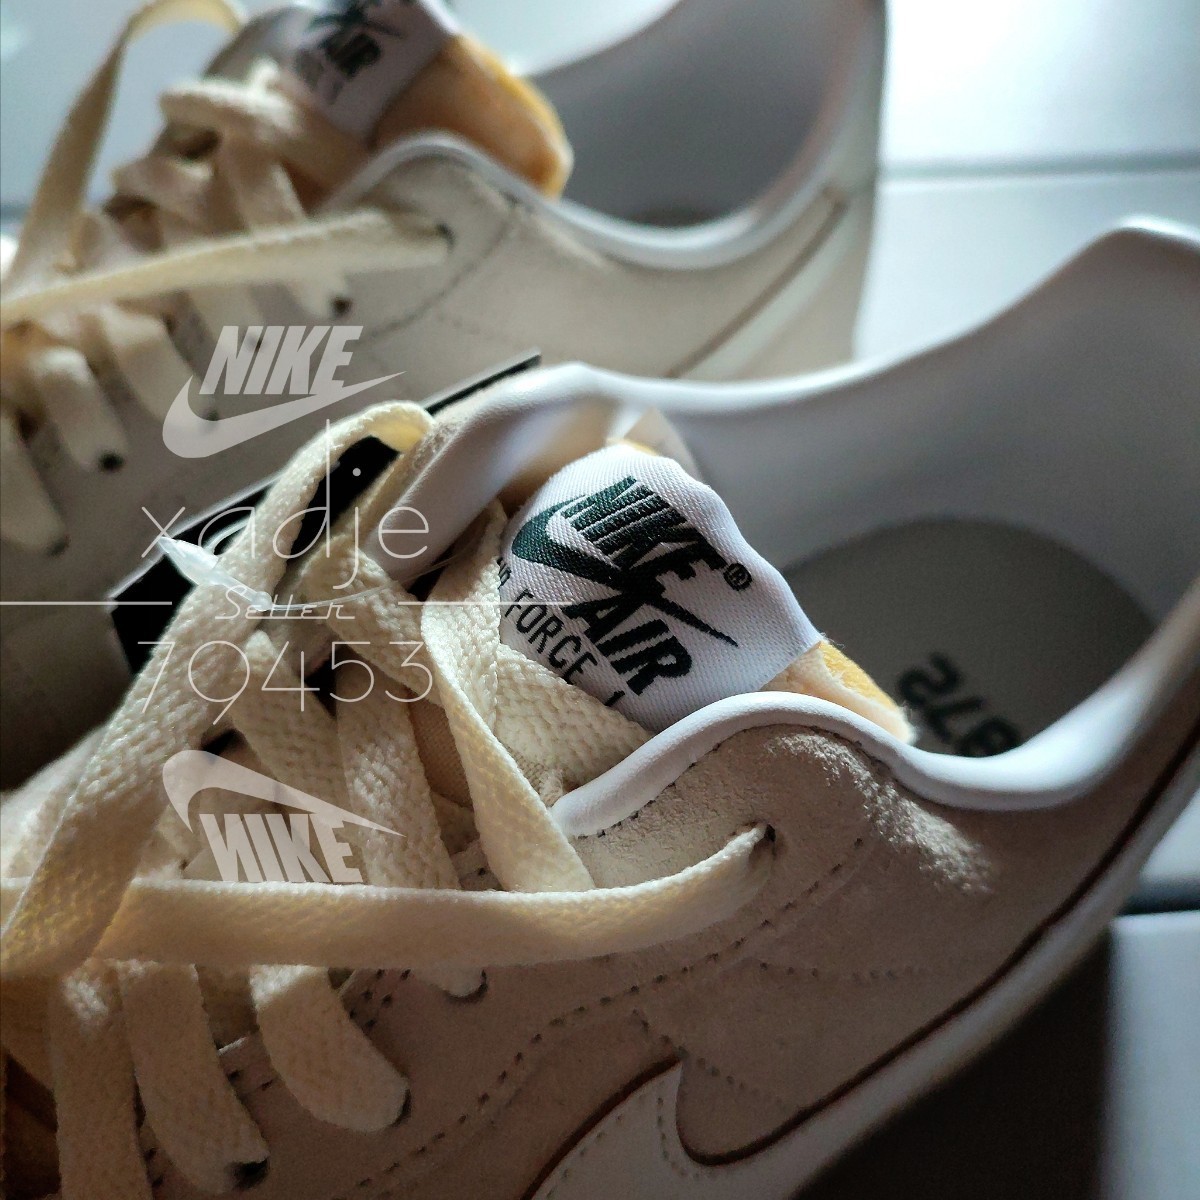  new goods regular goods NIKE Nike AIR FORCE1 LOW Air Force 1 low Sale white beige group leather suede 29cm US11 box less .